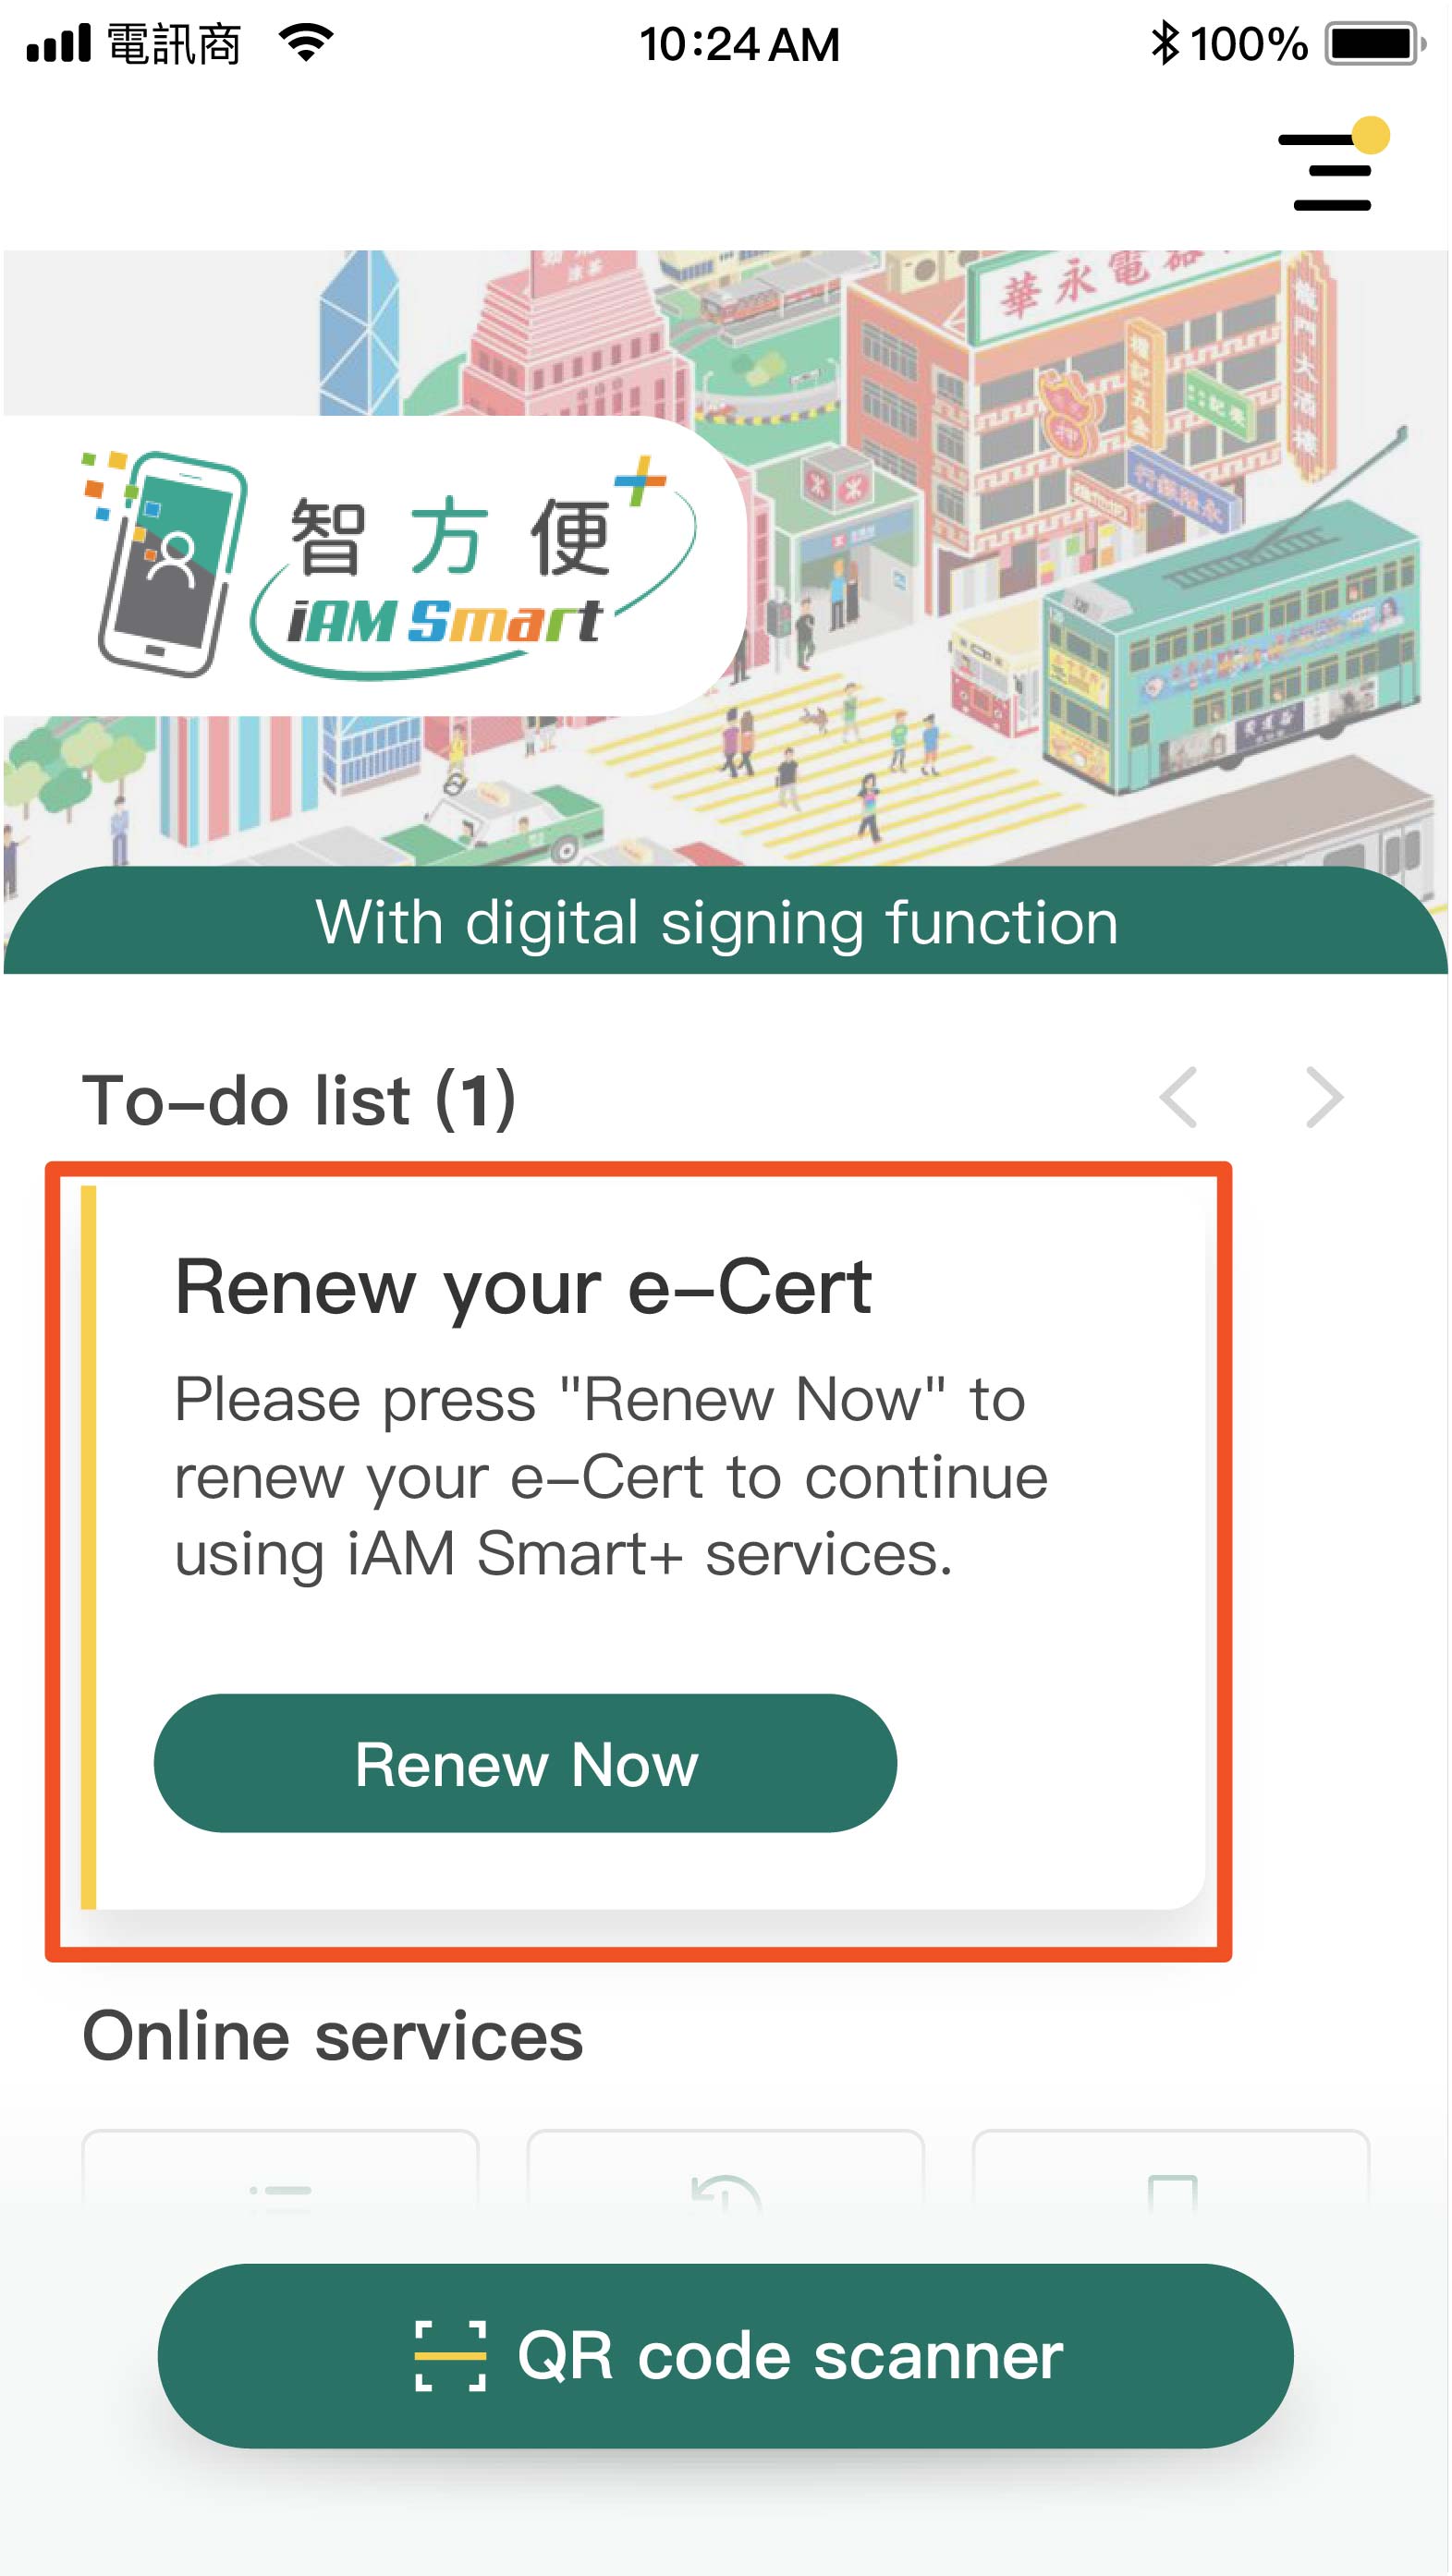 After the iAM Smart-Cert re-application is completed, a "Digital signing function is available now" message
will be displayed." title="After the iAM Smart-Cert re-application is completed, a "Digital signing function is available now" message will be displayed.